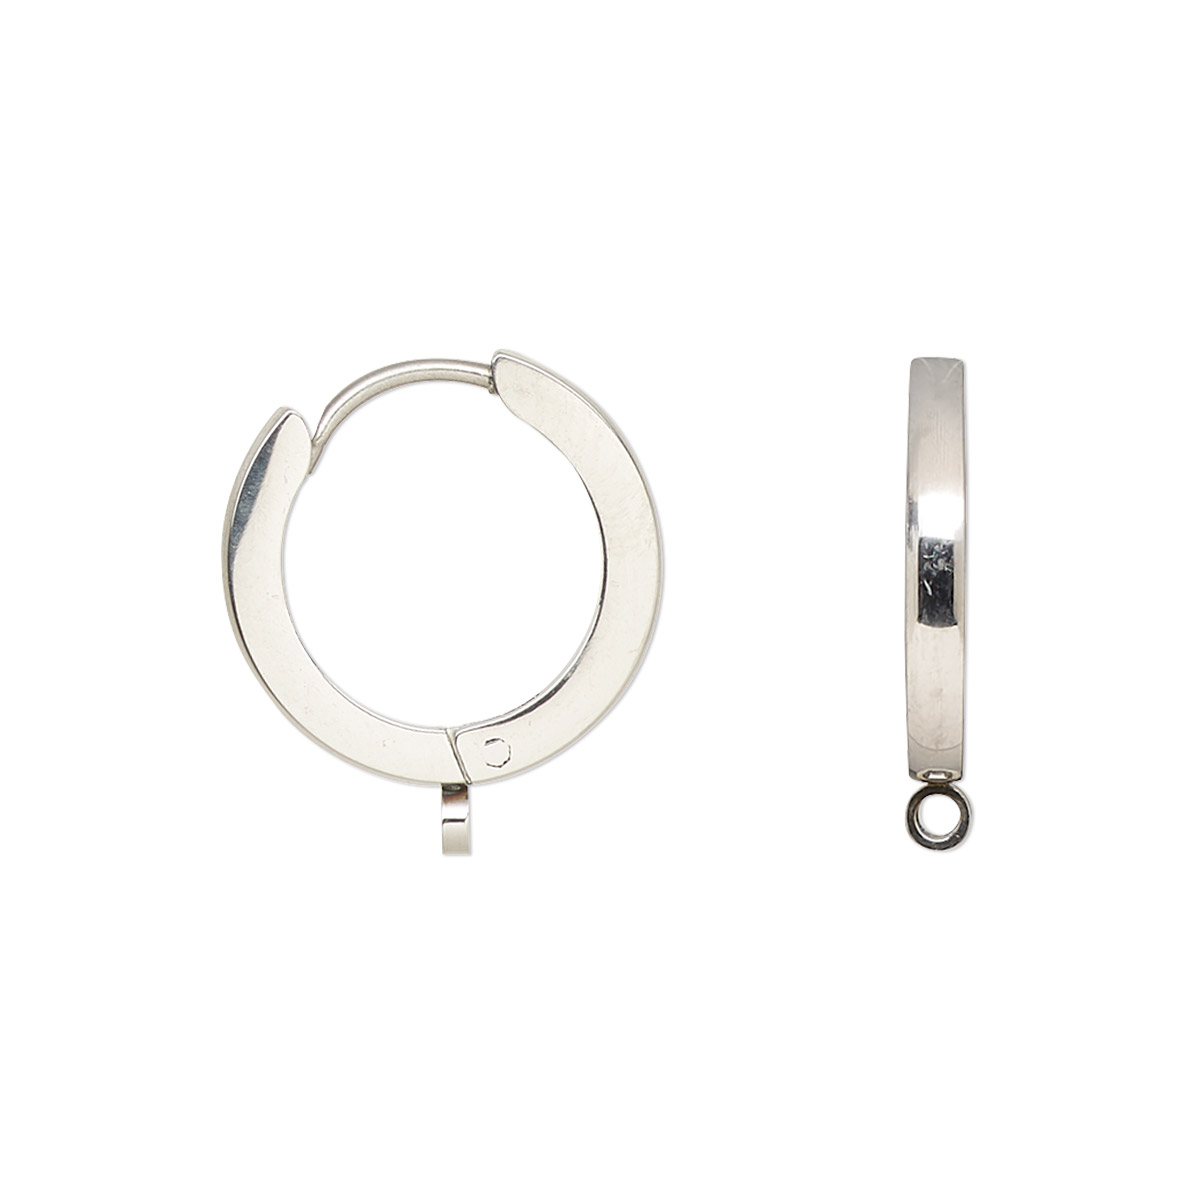 Earring, stainless steel, 18mm hinged hoop with closed loop and latch ...